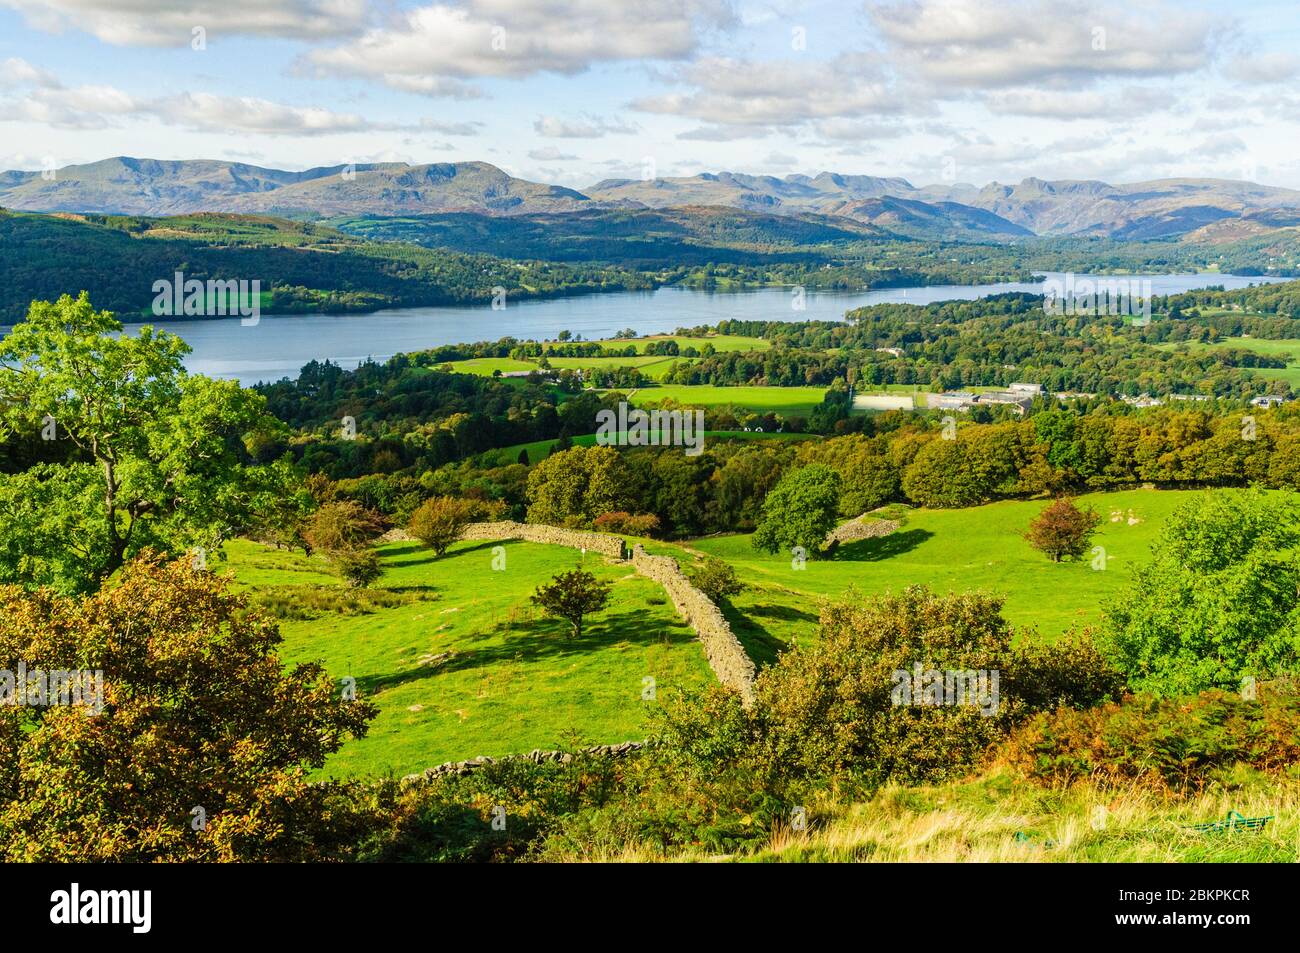 View from Orrest Head in the Lake District over Windermere to Coniston Fells, Crinkle Crags, Bowfell and the Langdale Pikes. Stock Photo